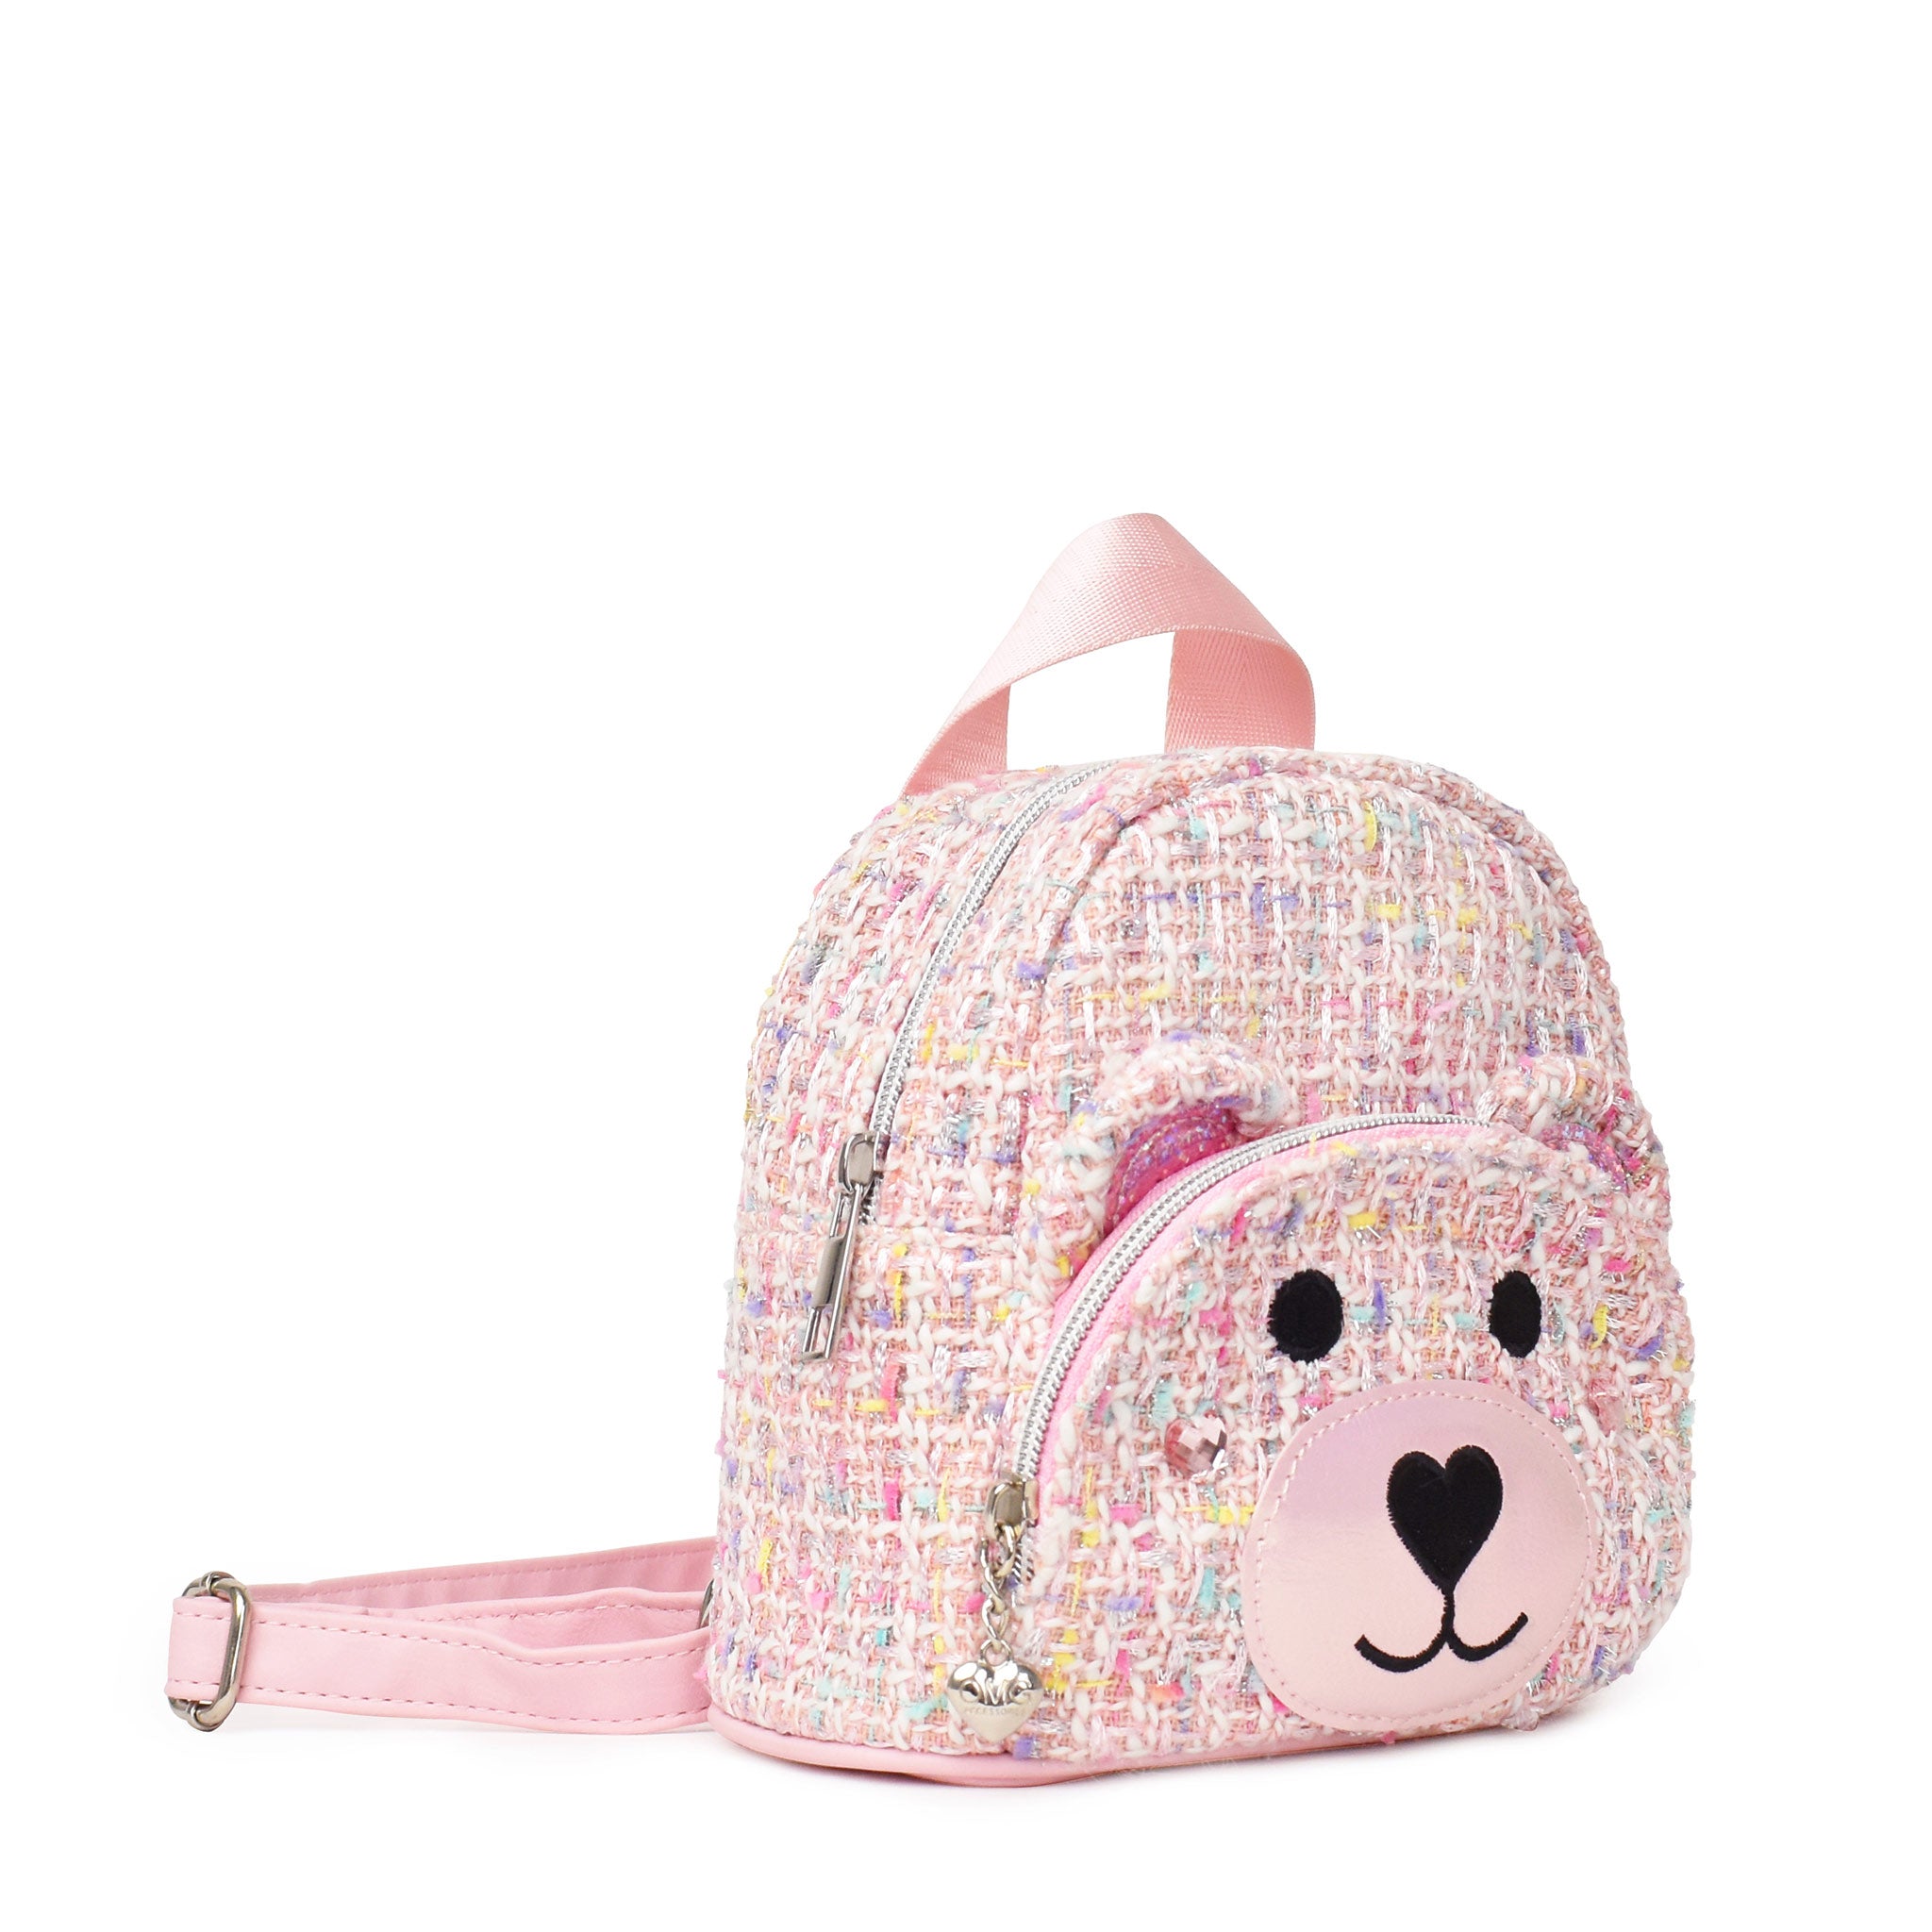 Side view of a pink tweed miniature backpack with a teddy bear face